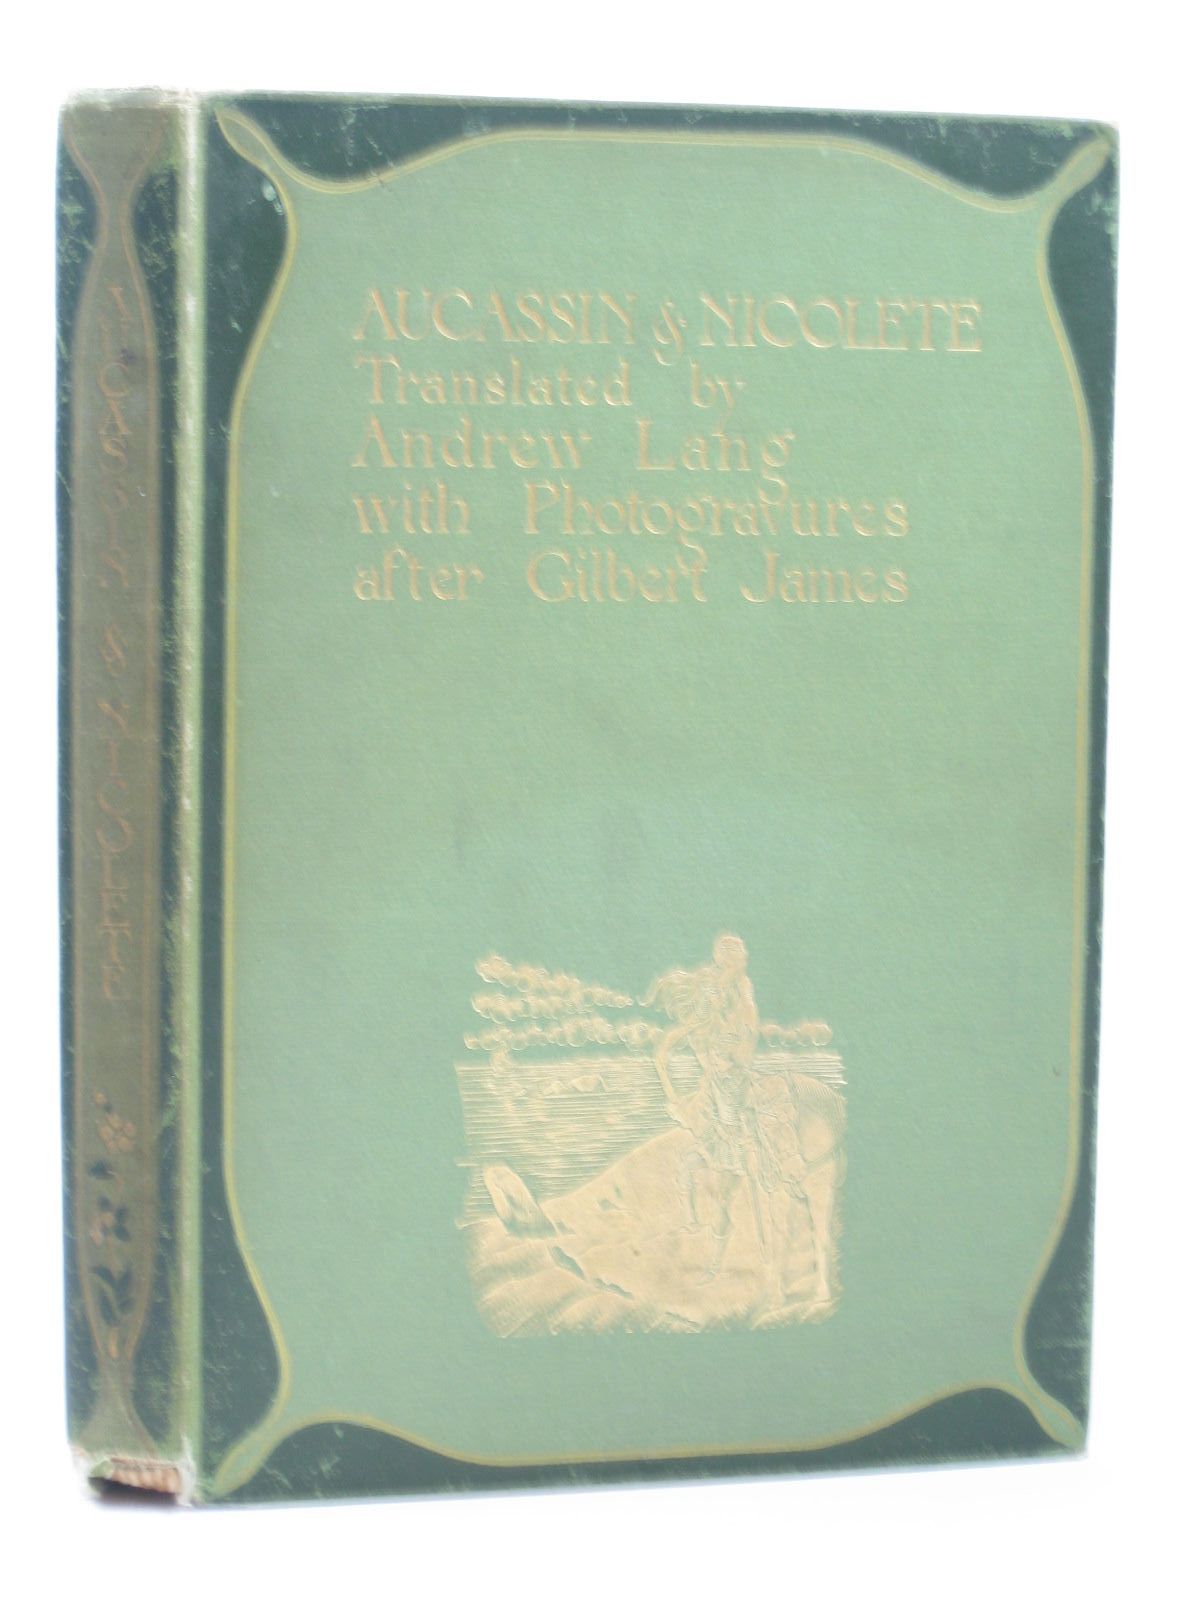 Photo of AUCASSIN AND NICOLETE written by Lang, Andrew illustrated by James, Gilbert published by George Routledge & Sons Ltd. (STOCK CODE: 1502187)  for sale by Stella & Rose's Books